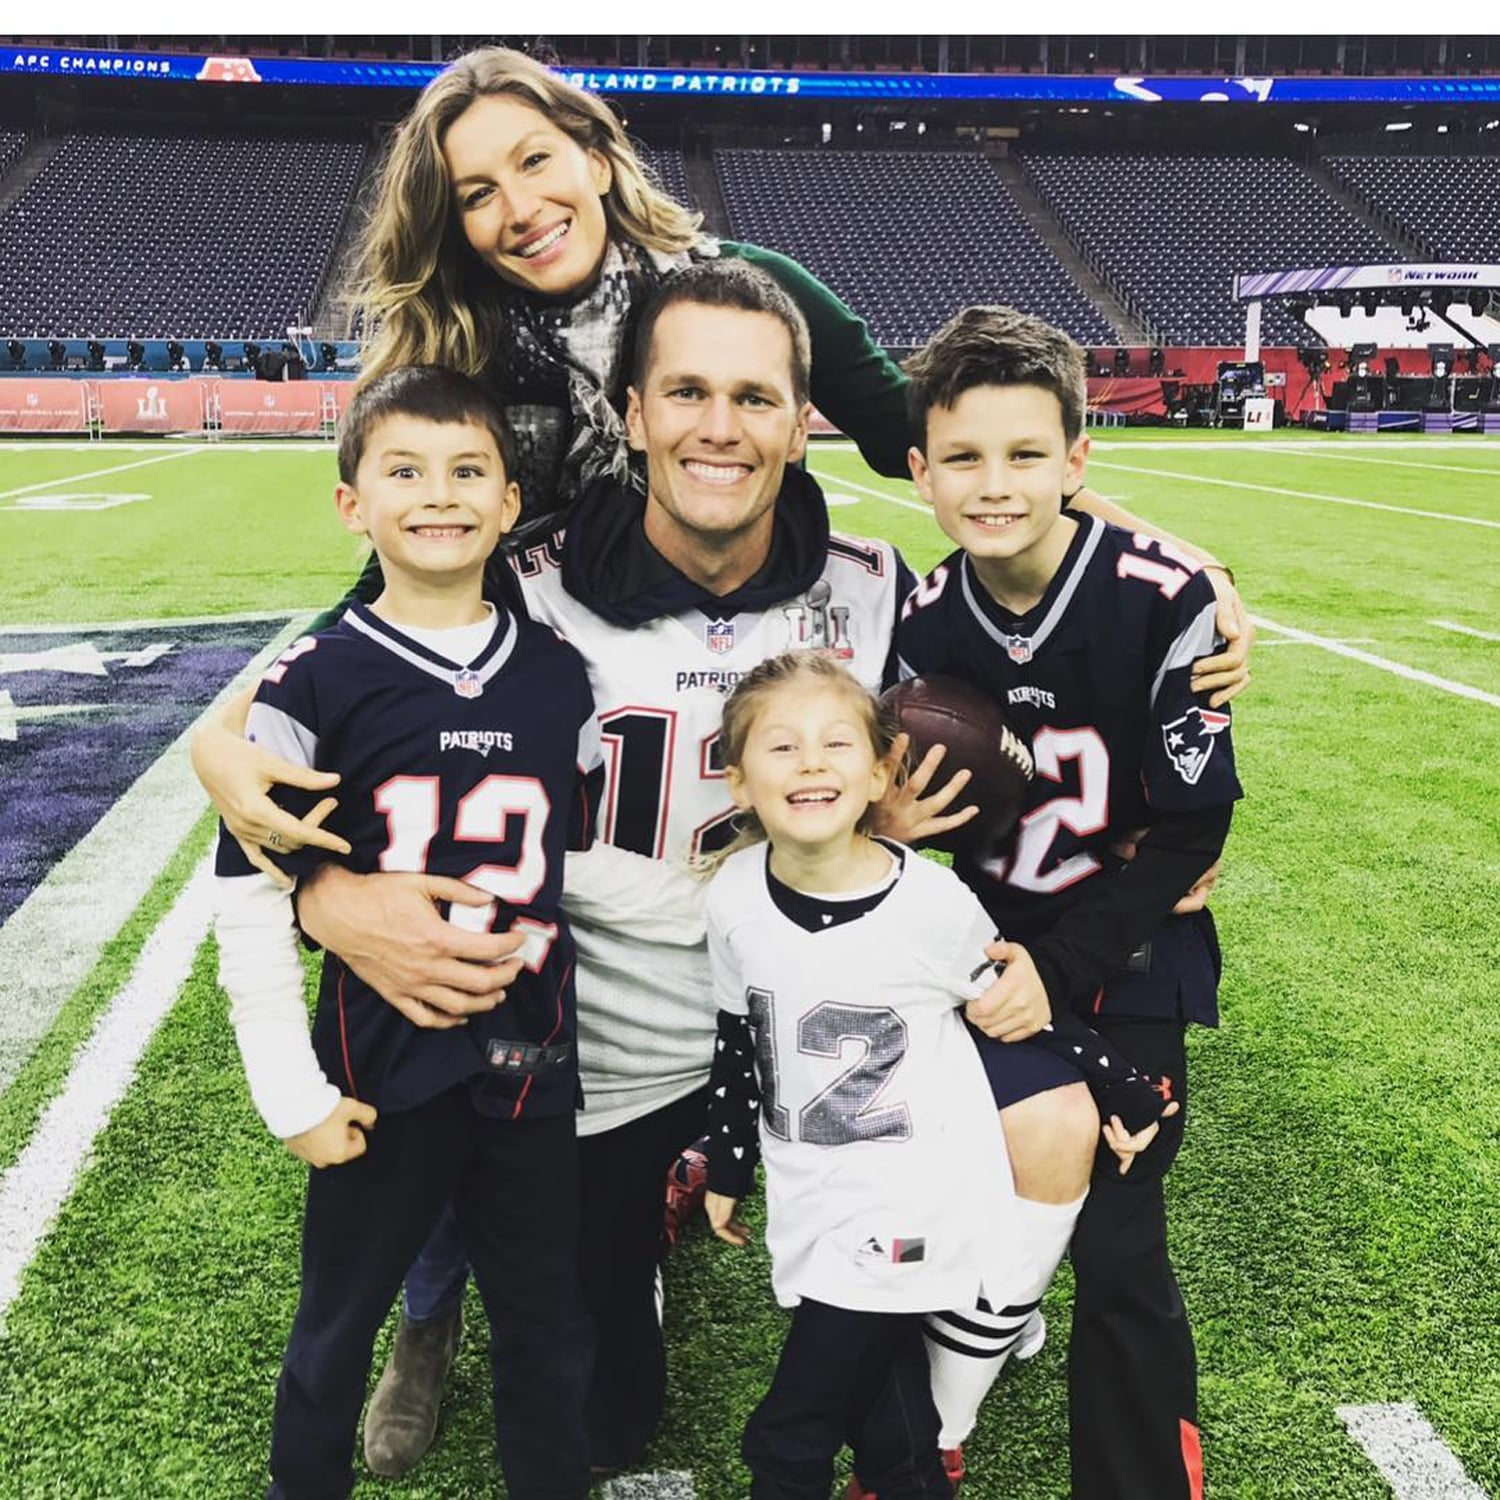 Tom Brady Men's Health Interview About Kids and Sports